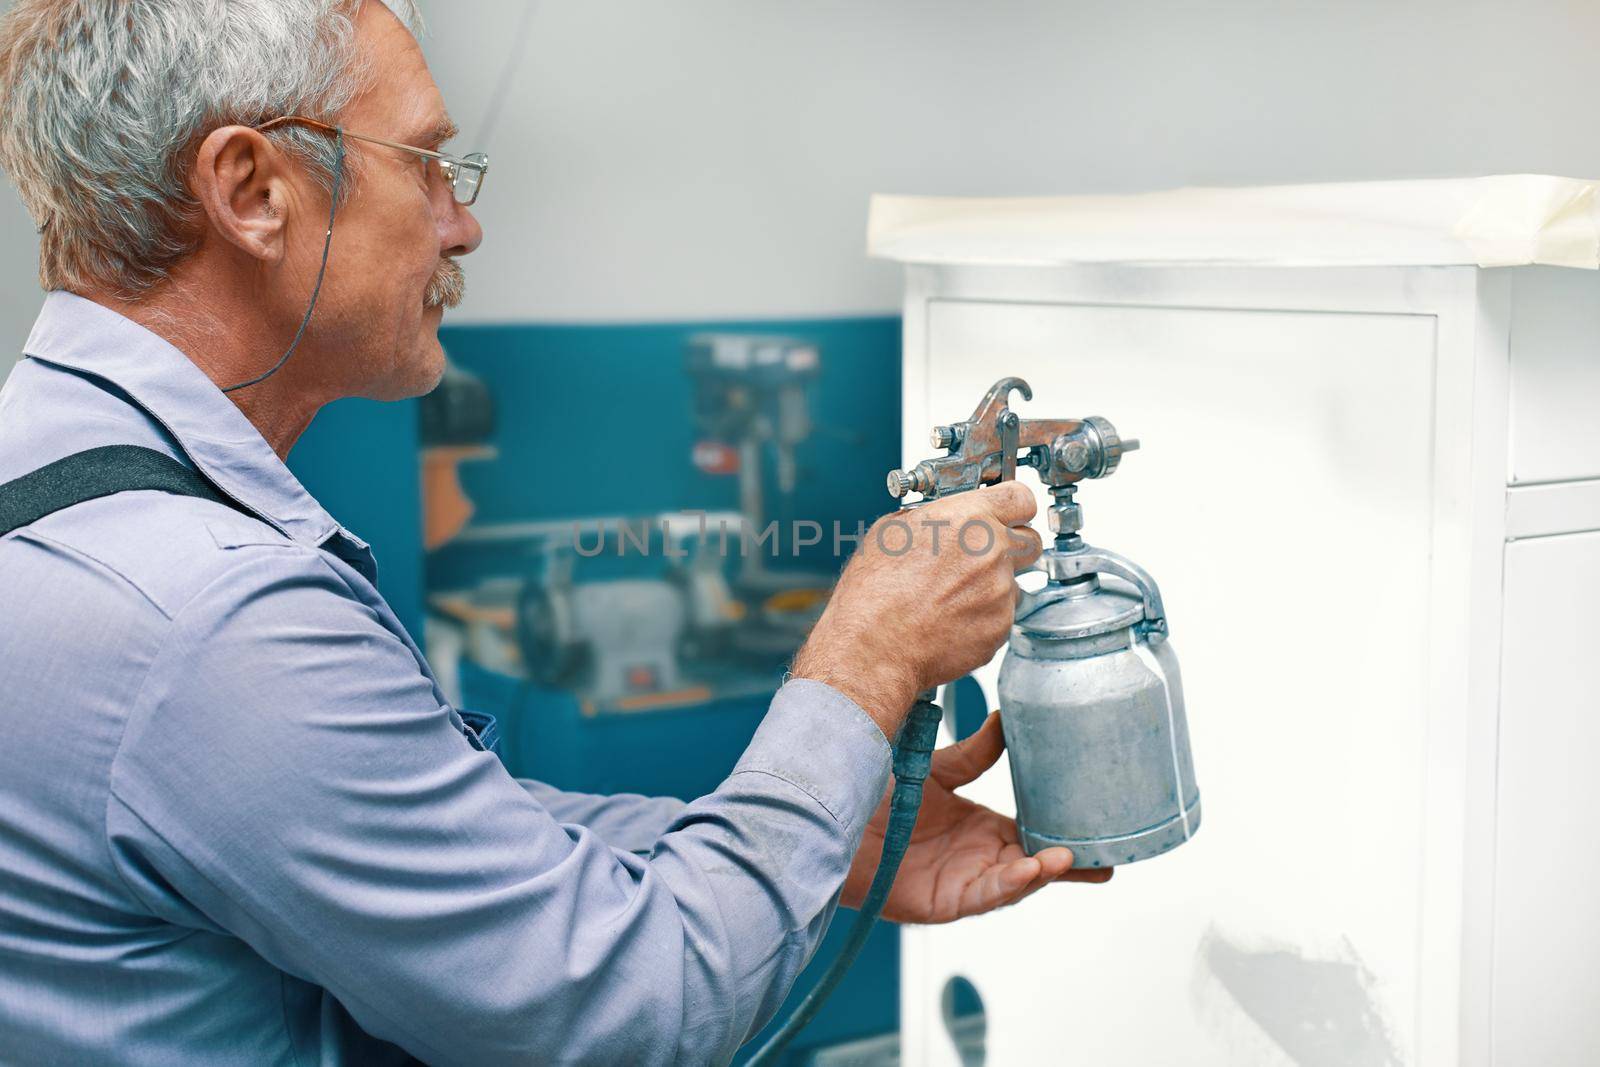 Painting of metal products. An elderly man paints a Cabinet with a compressor by SergeyPakulin